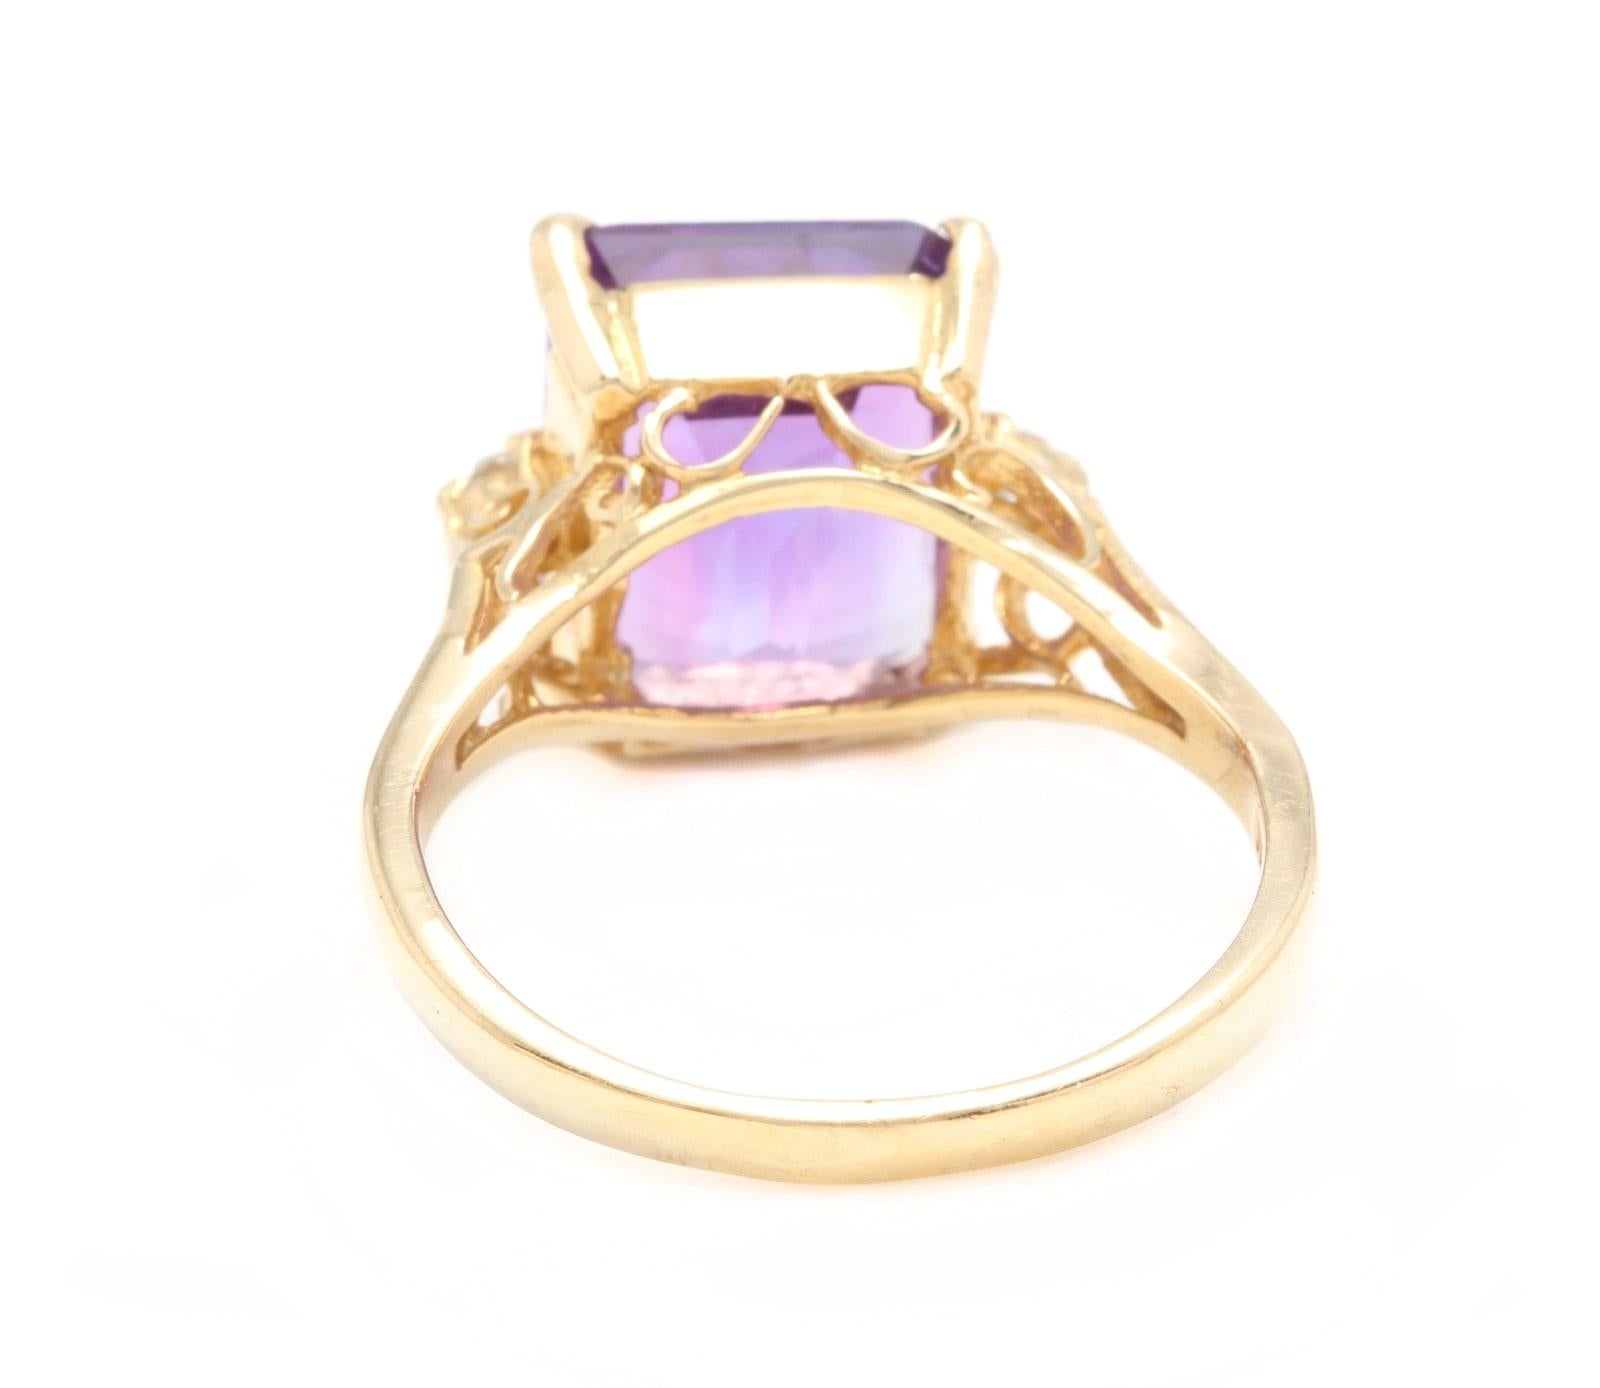 5.08 Carat Natural Amethyst and Diamond 14 Karat Solid Yellow Gold Ring In New Condition For Sale In Los Angeles, CA